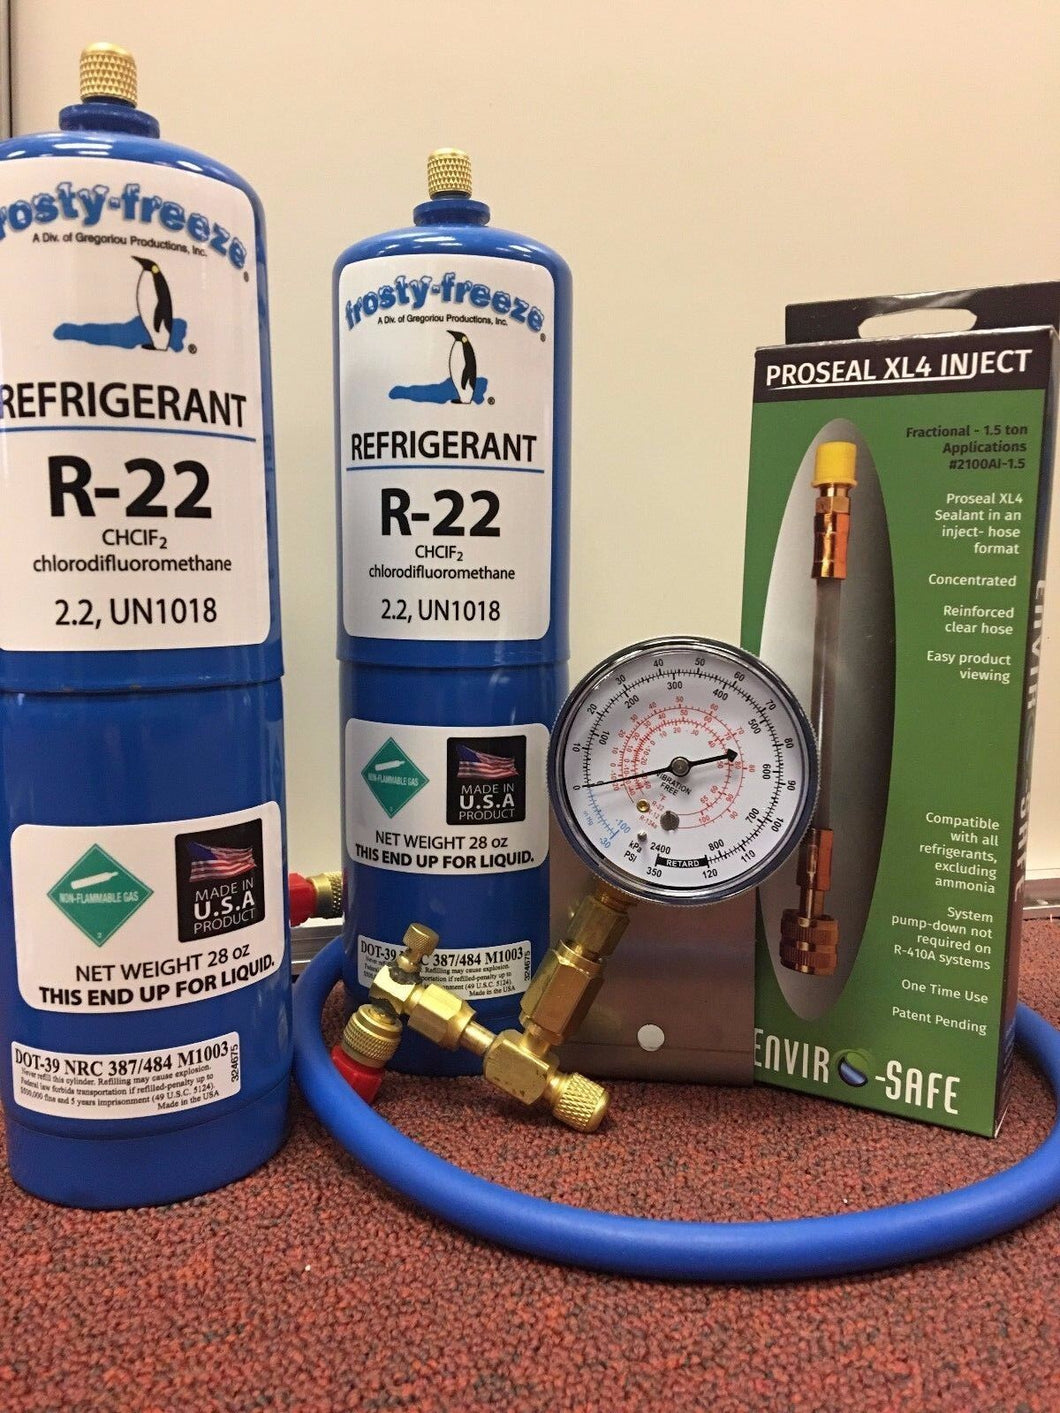 R22 Refrigerant R-22, Air Conditioner, (2) 28 oz Cans, LARGE, Recharge Kit